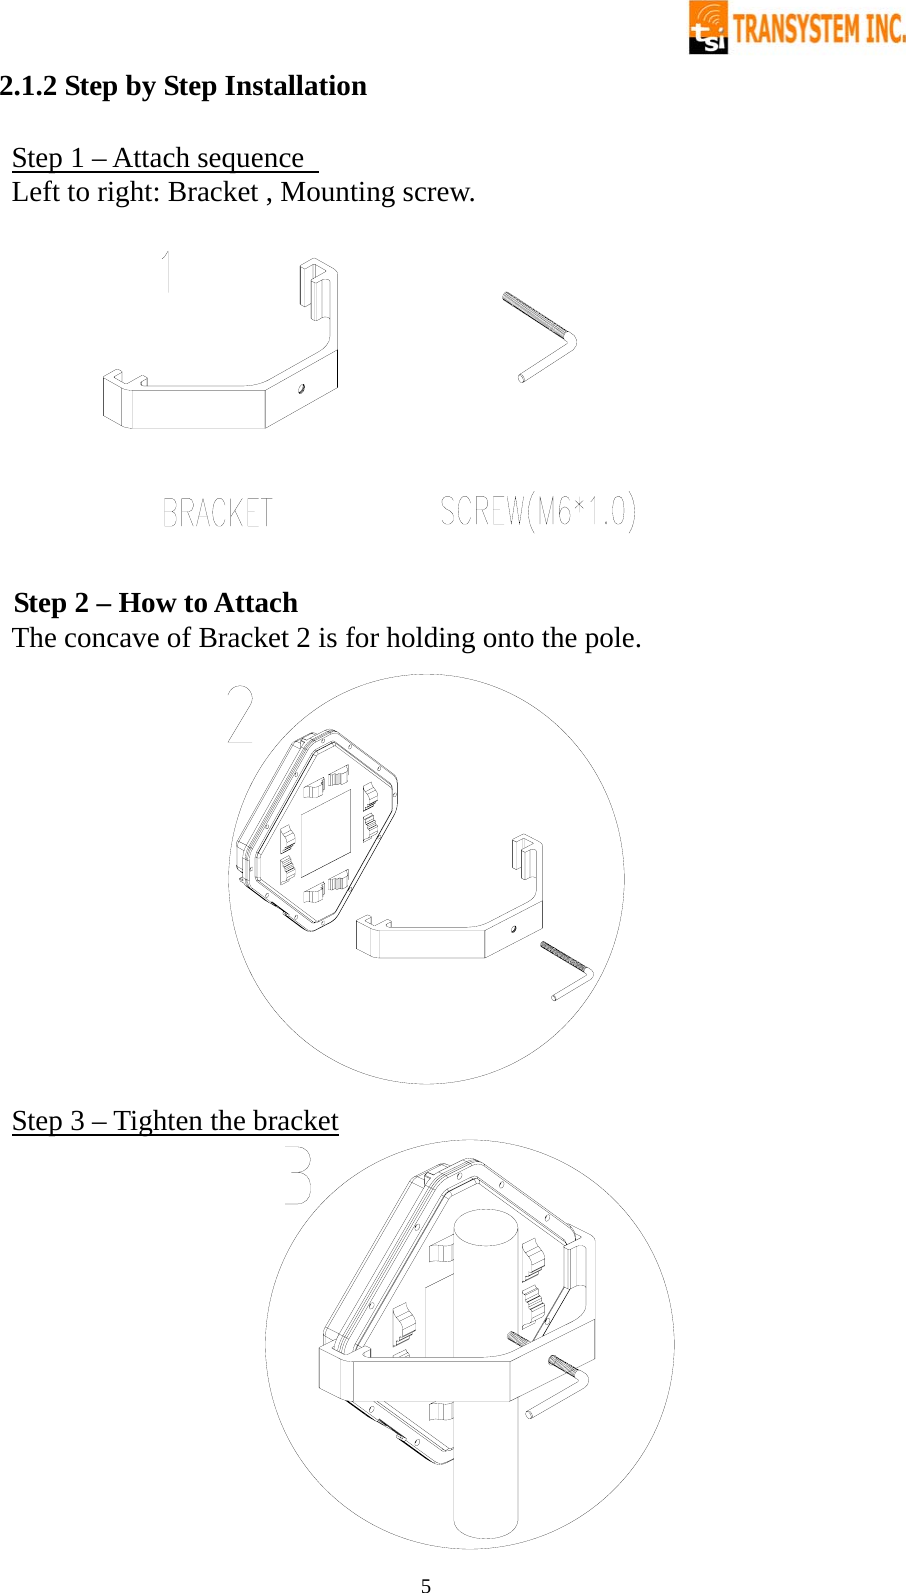   52.1.2 Step by Step Installation  Step 1 – Attach sequence   Left to right: Bracket , Mounting screw.    Step 2 – How to Attach The concave of Bracket 2 is for holding onto the pole.  Step 3 – Tighten the bracket  